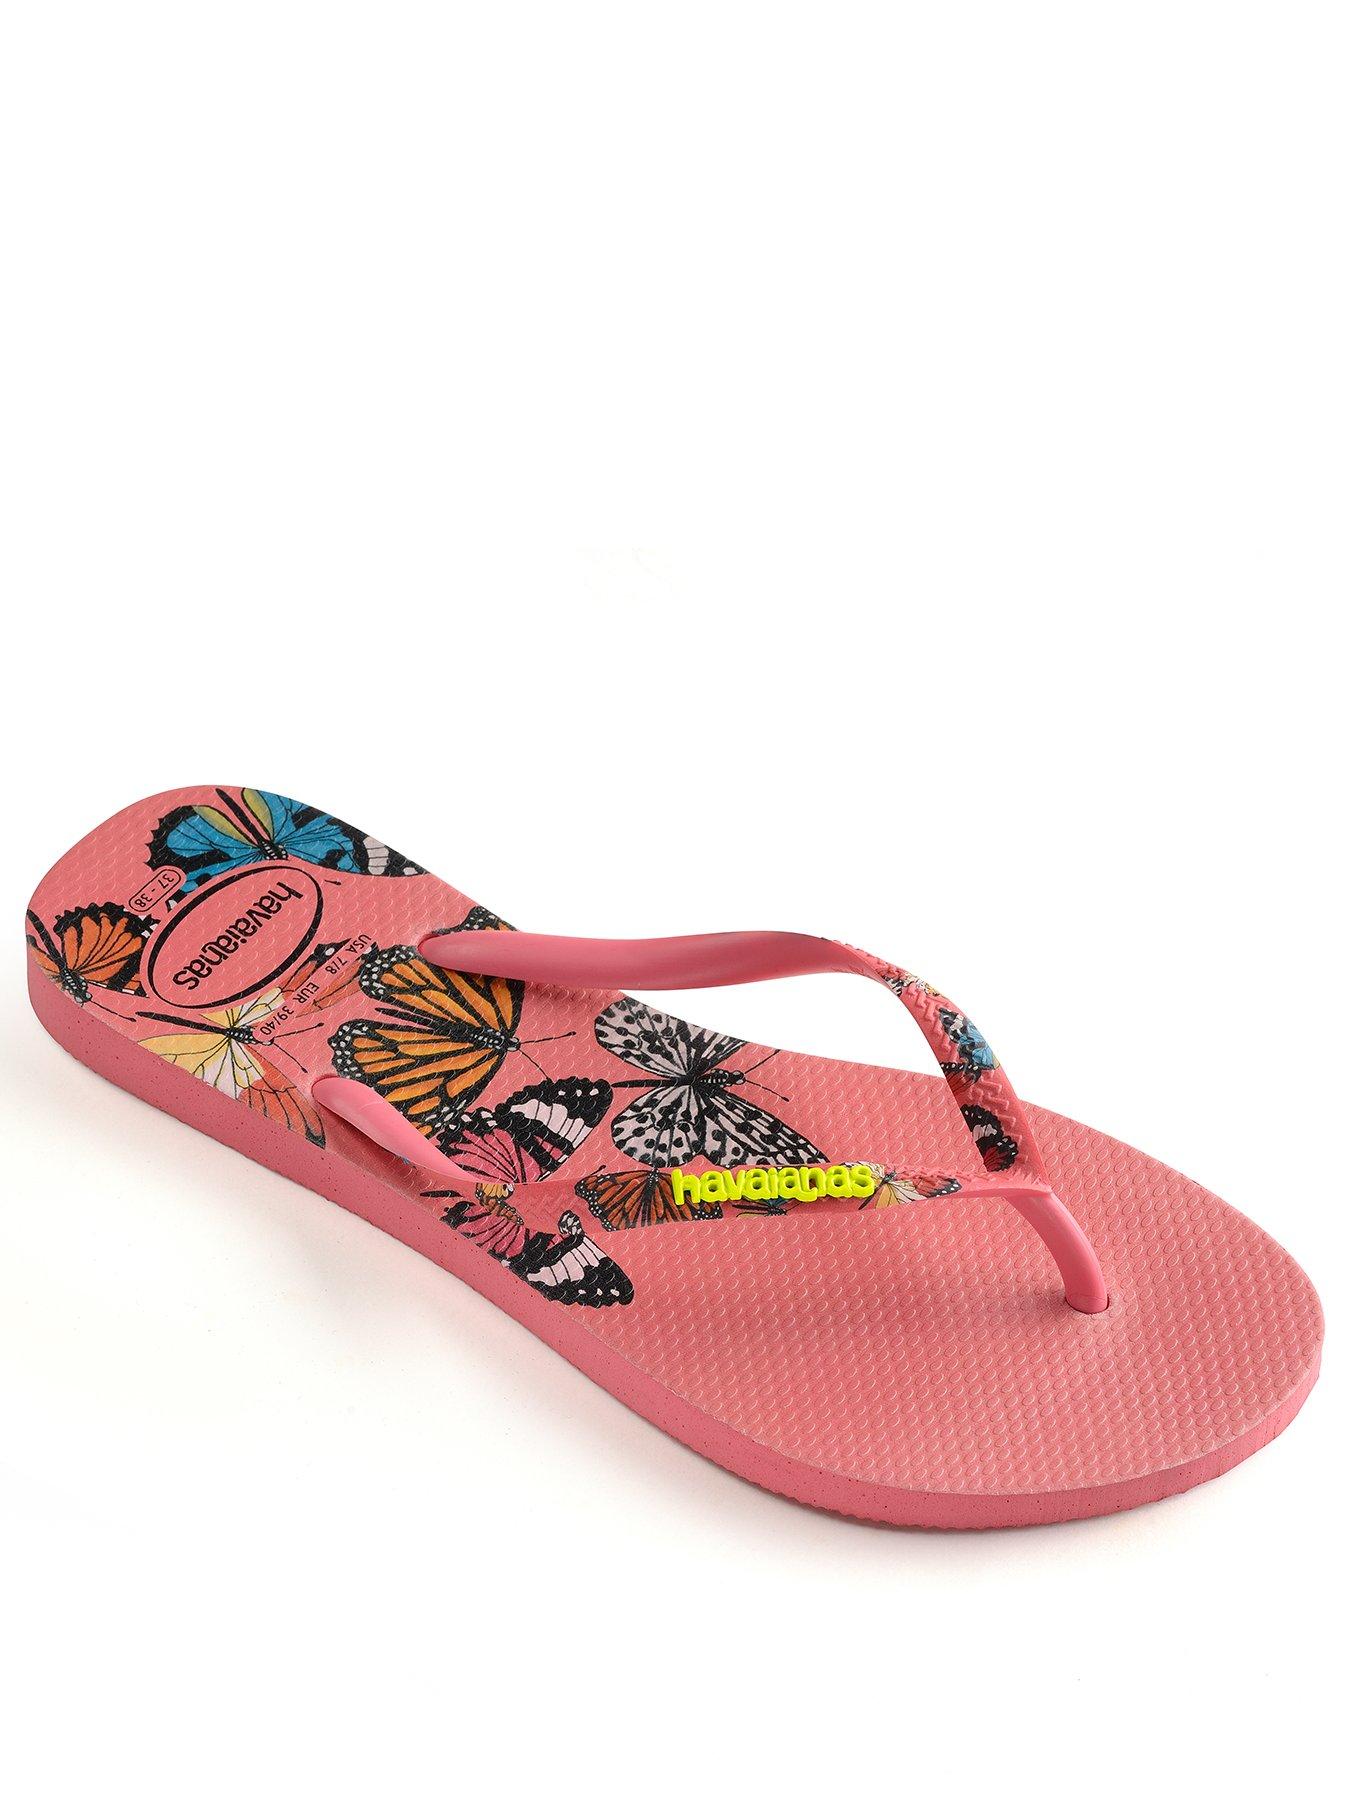 havaianas m and m direct